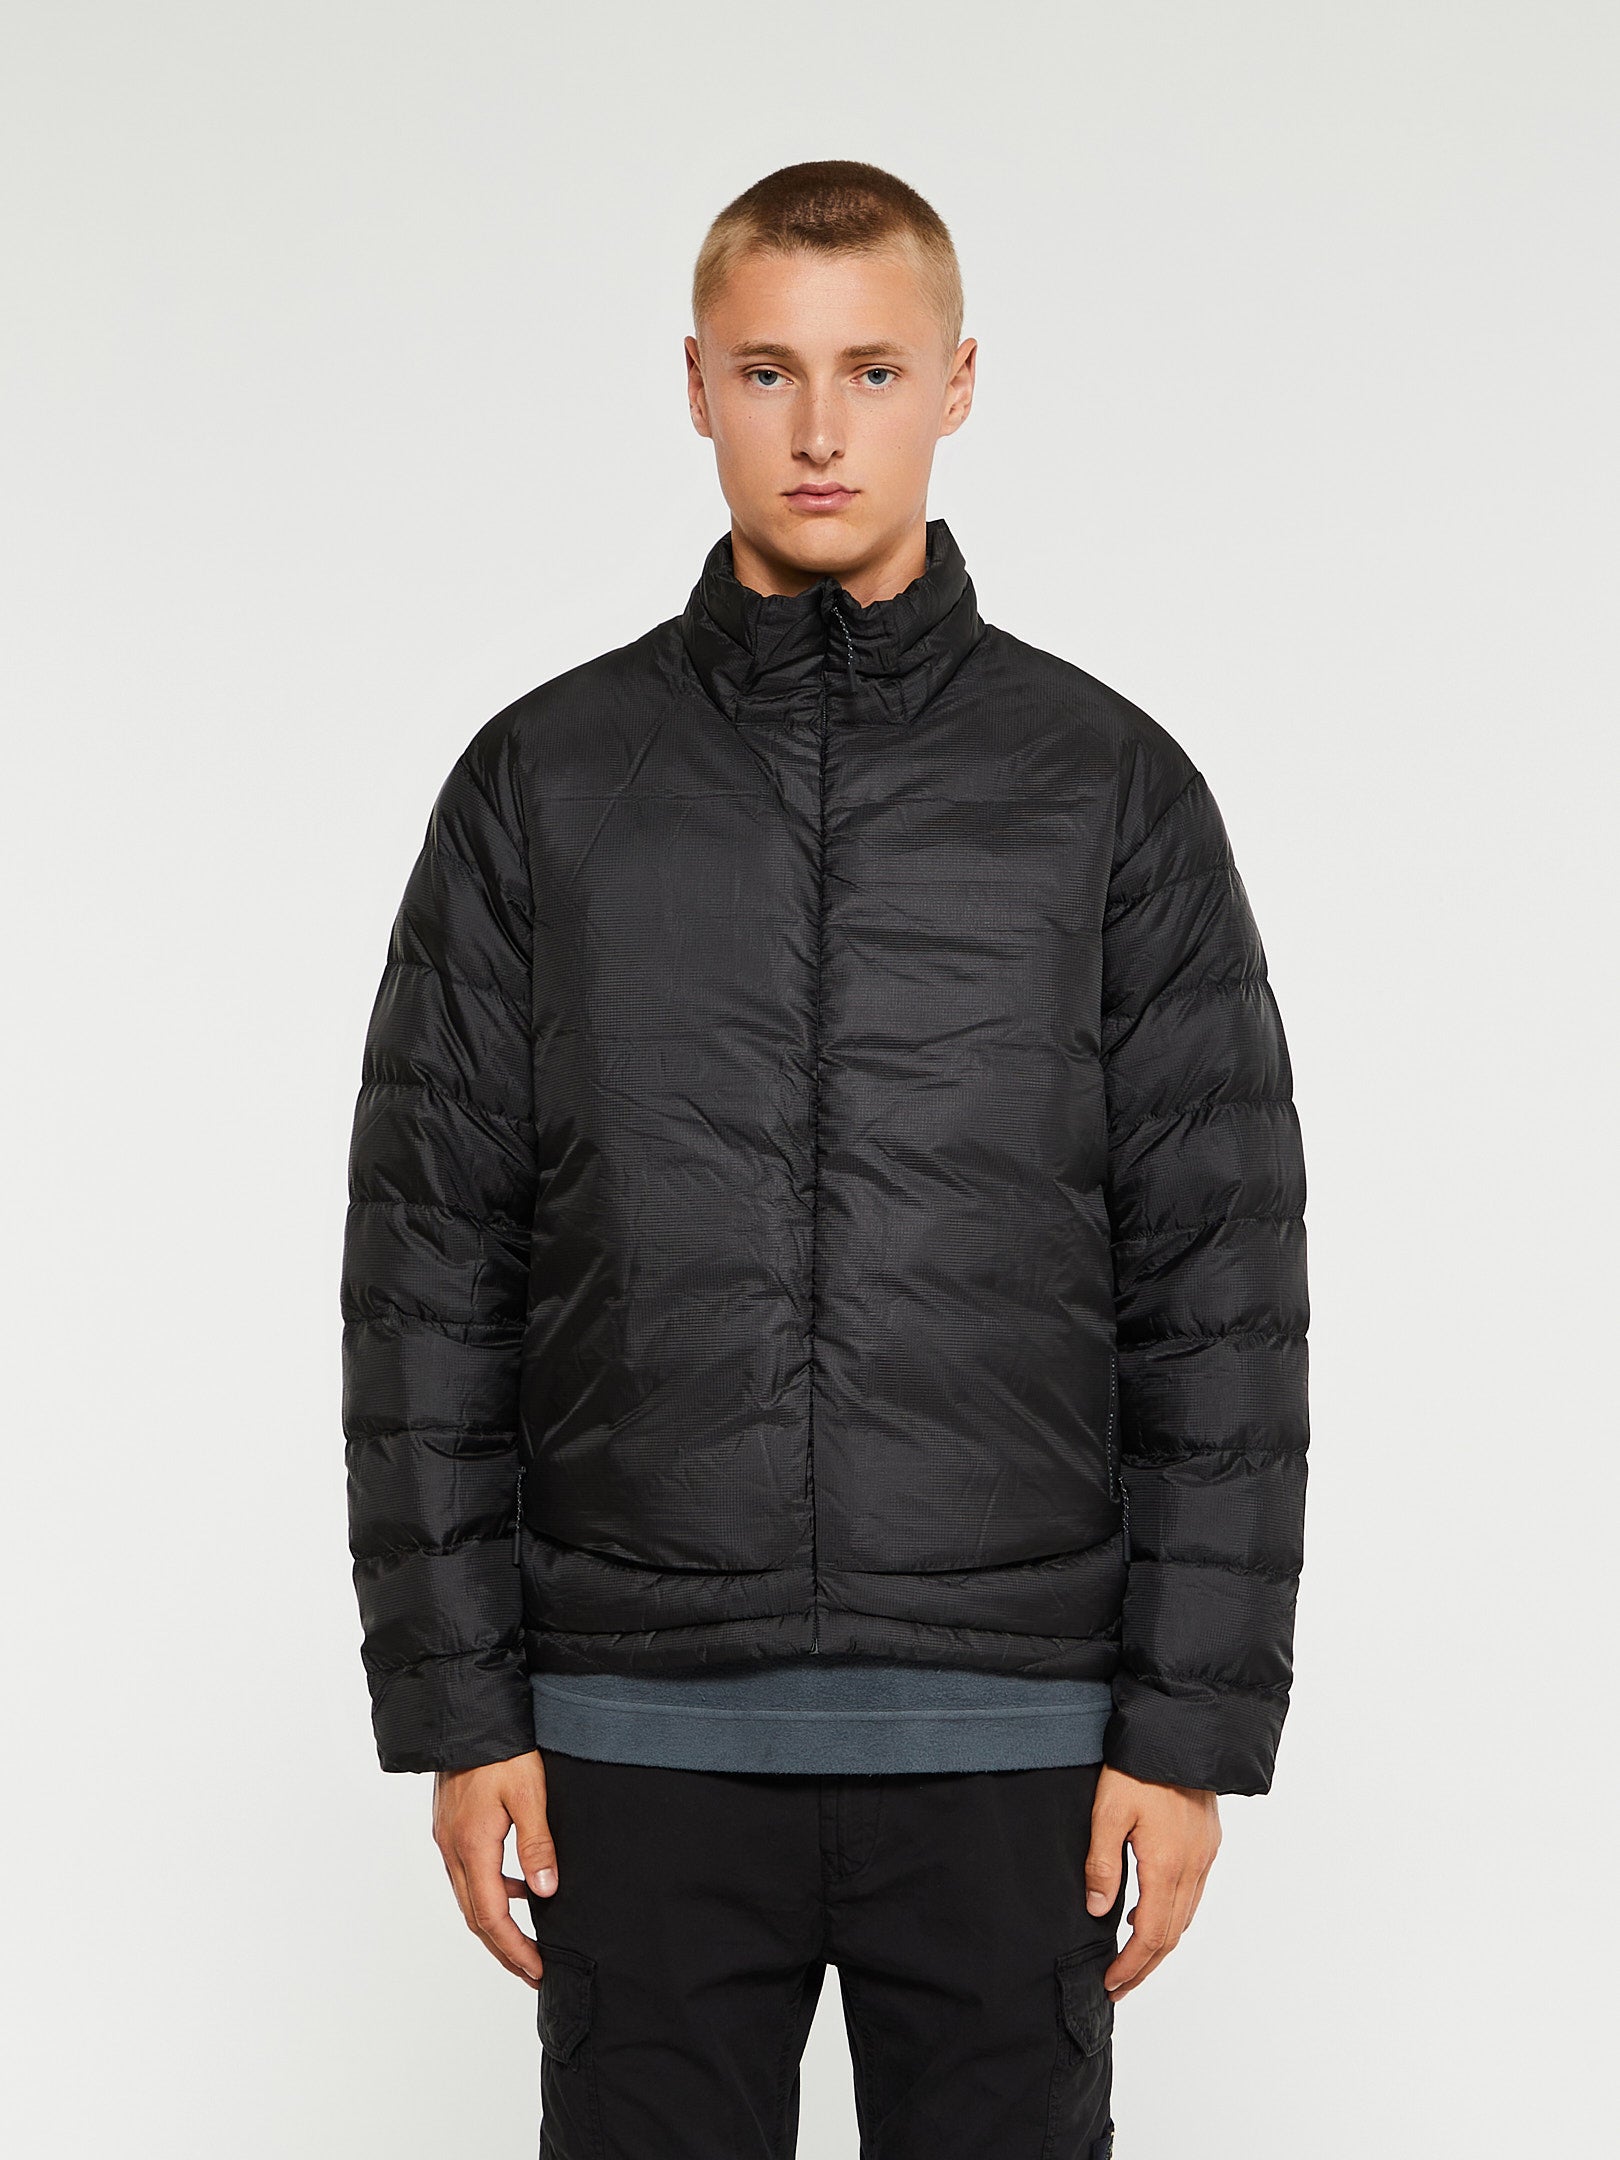 Norse Projects - Down Pasmo Rip Jacket in Black